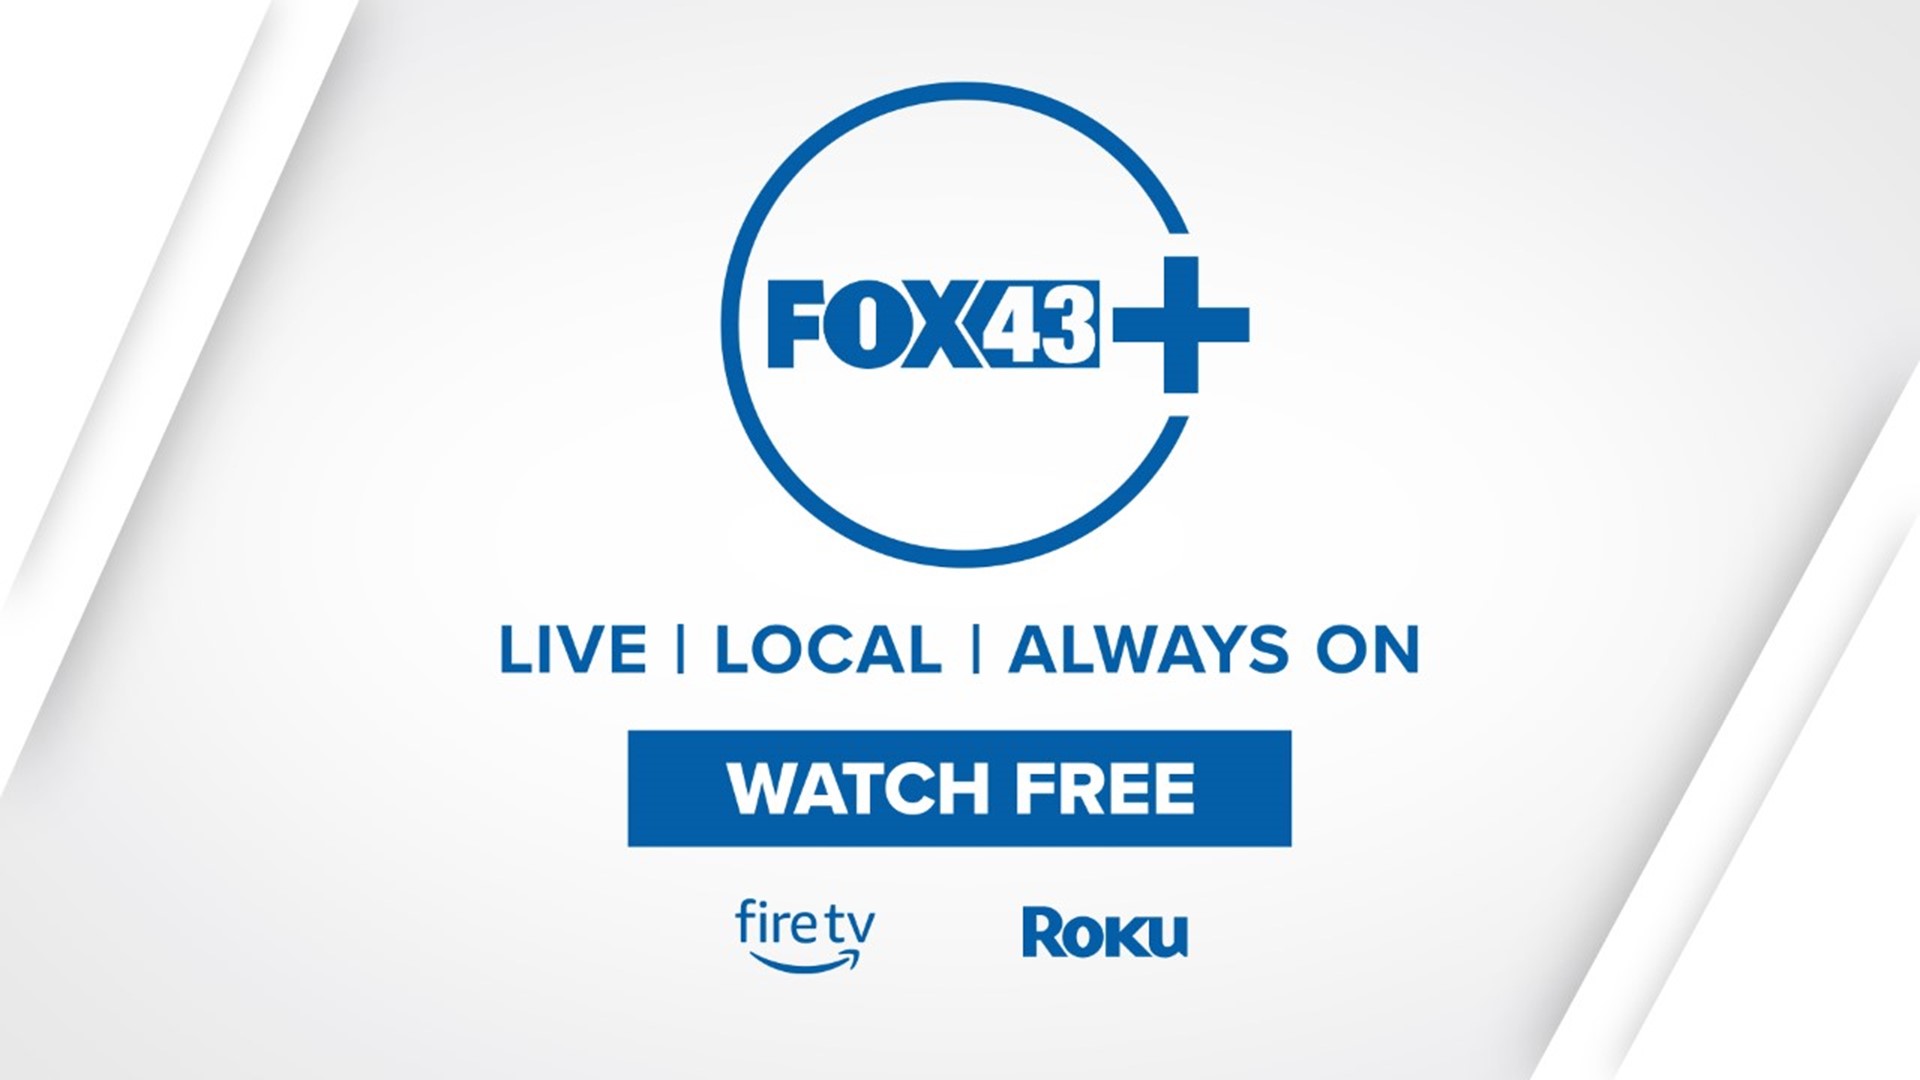 Now you can watch FOX43+ on Roku and Amazon Fire TV, for free.